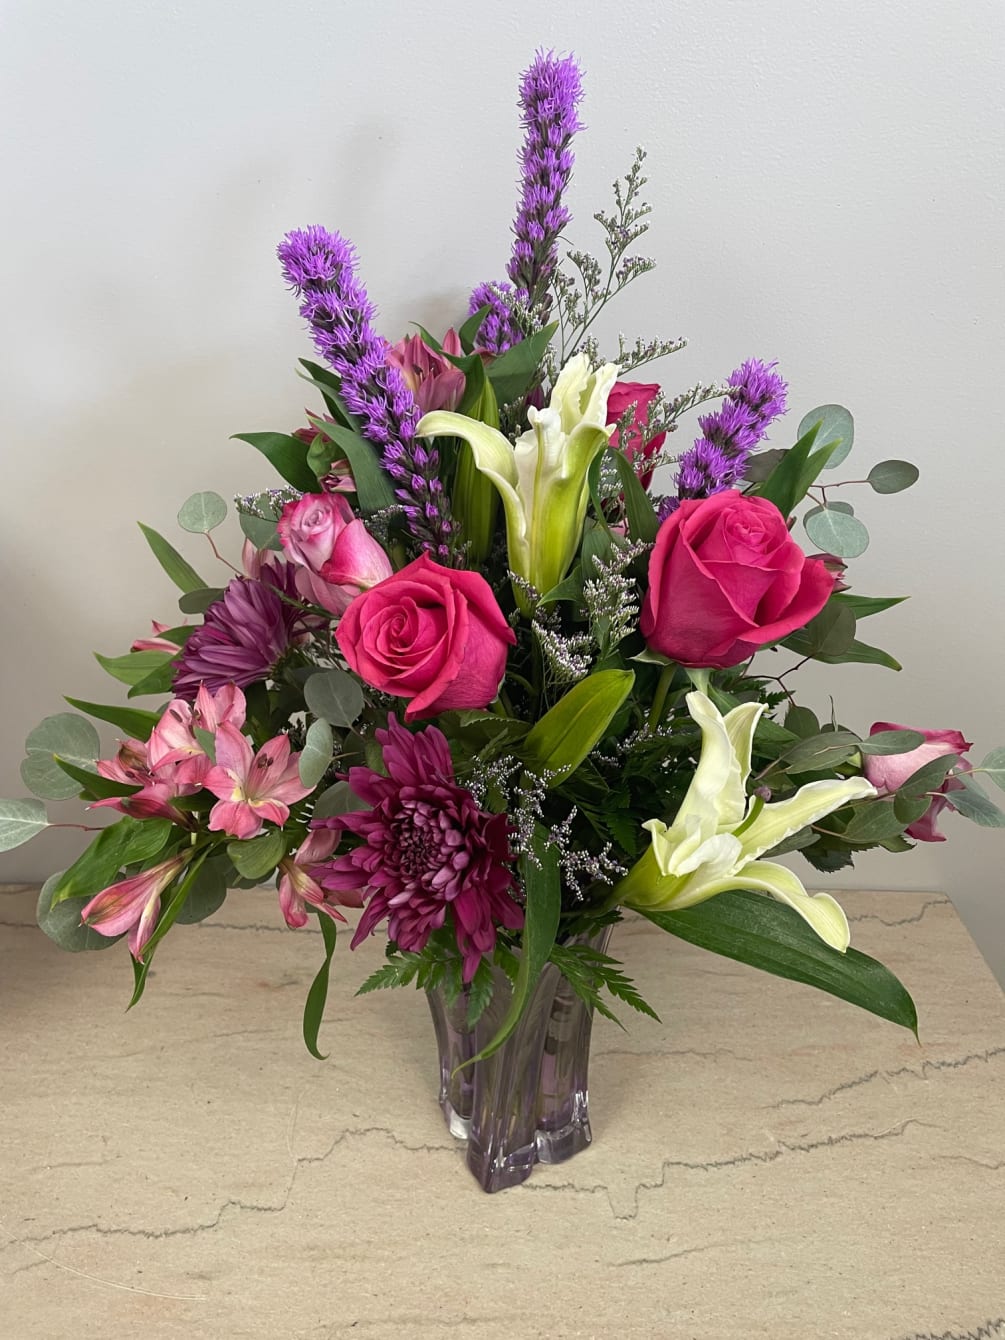 A gorgeous collection of fragrant favorites-Lilies and roses accented with a lovely